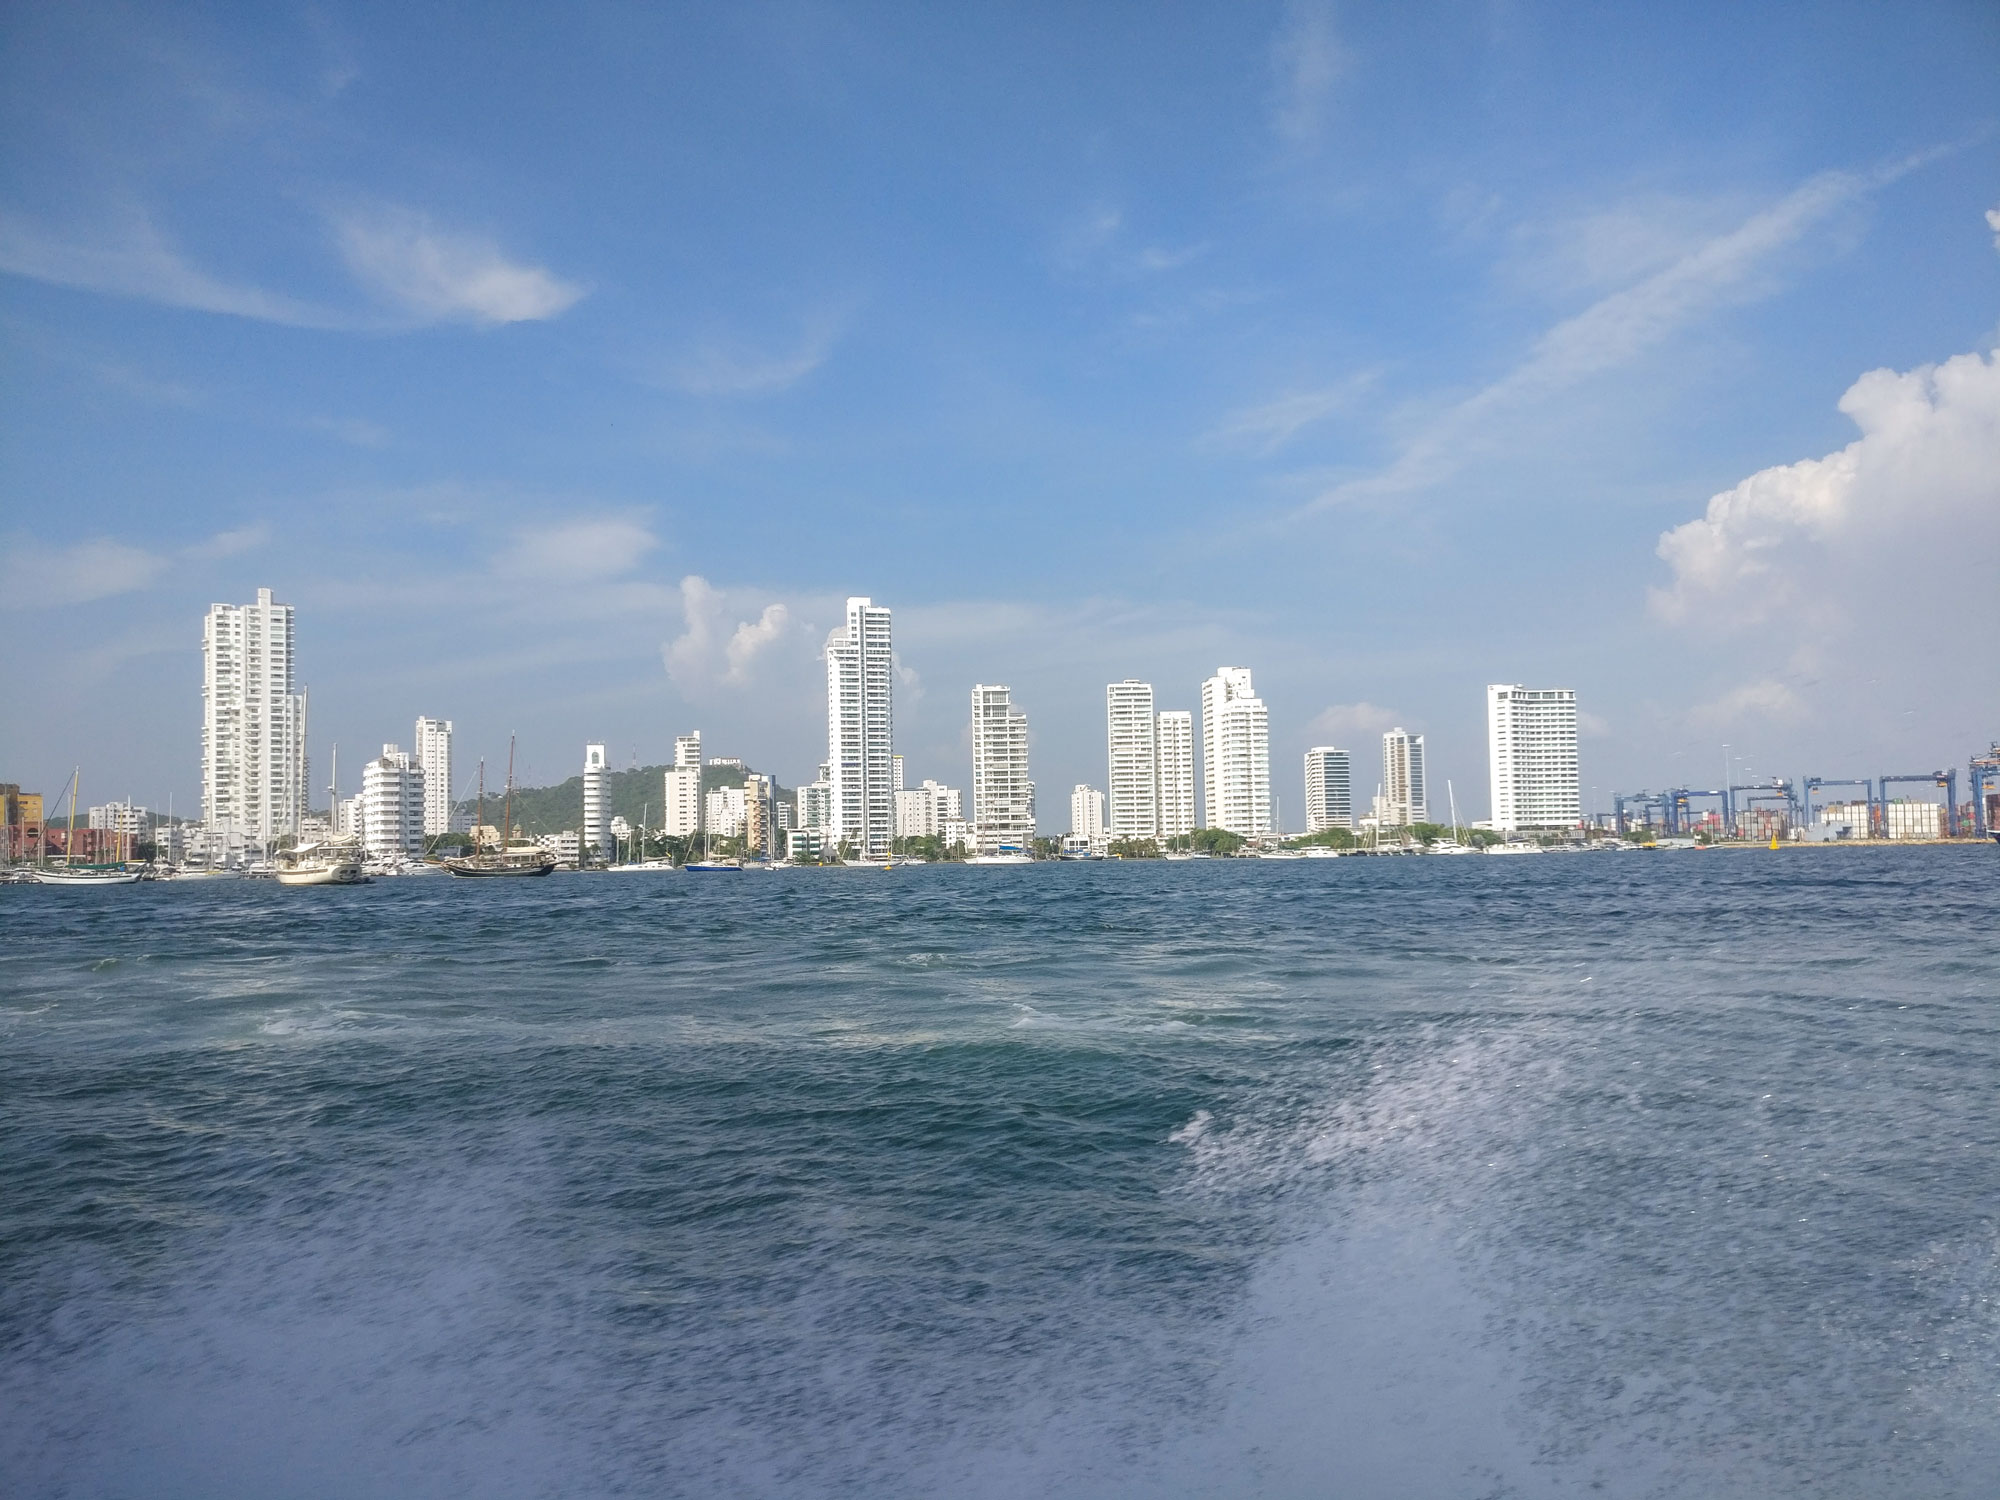 View of the skyline from the boat